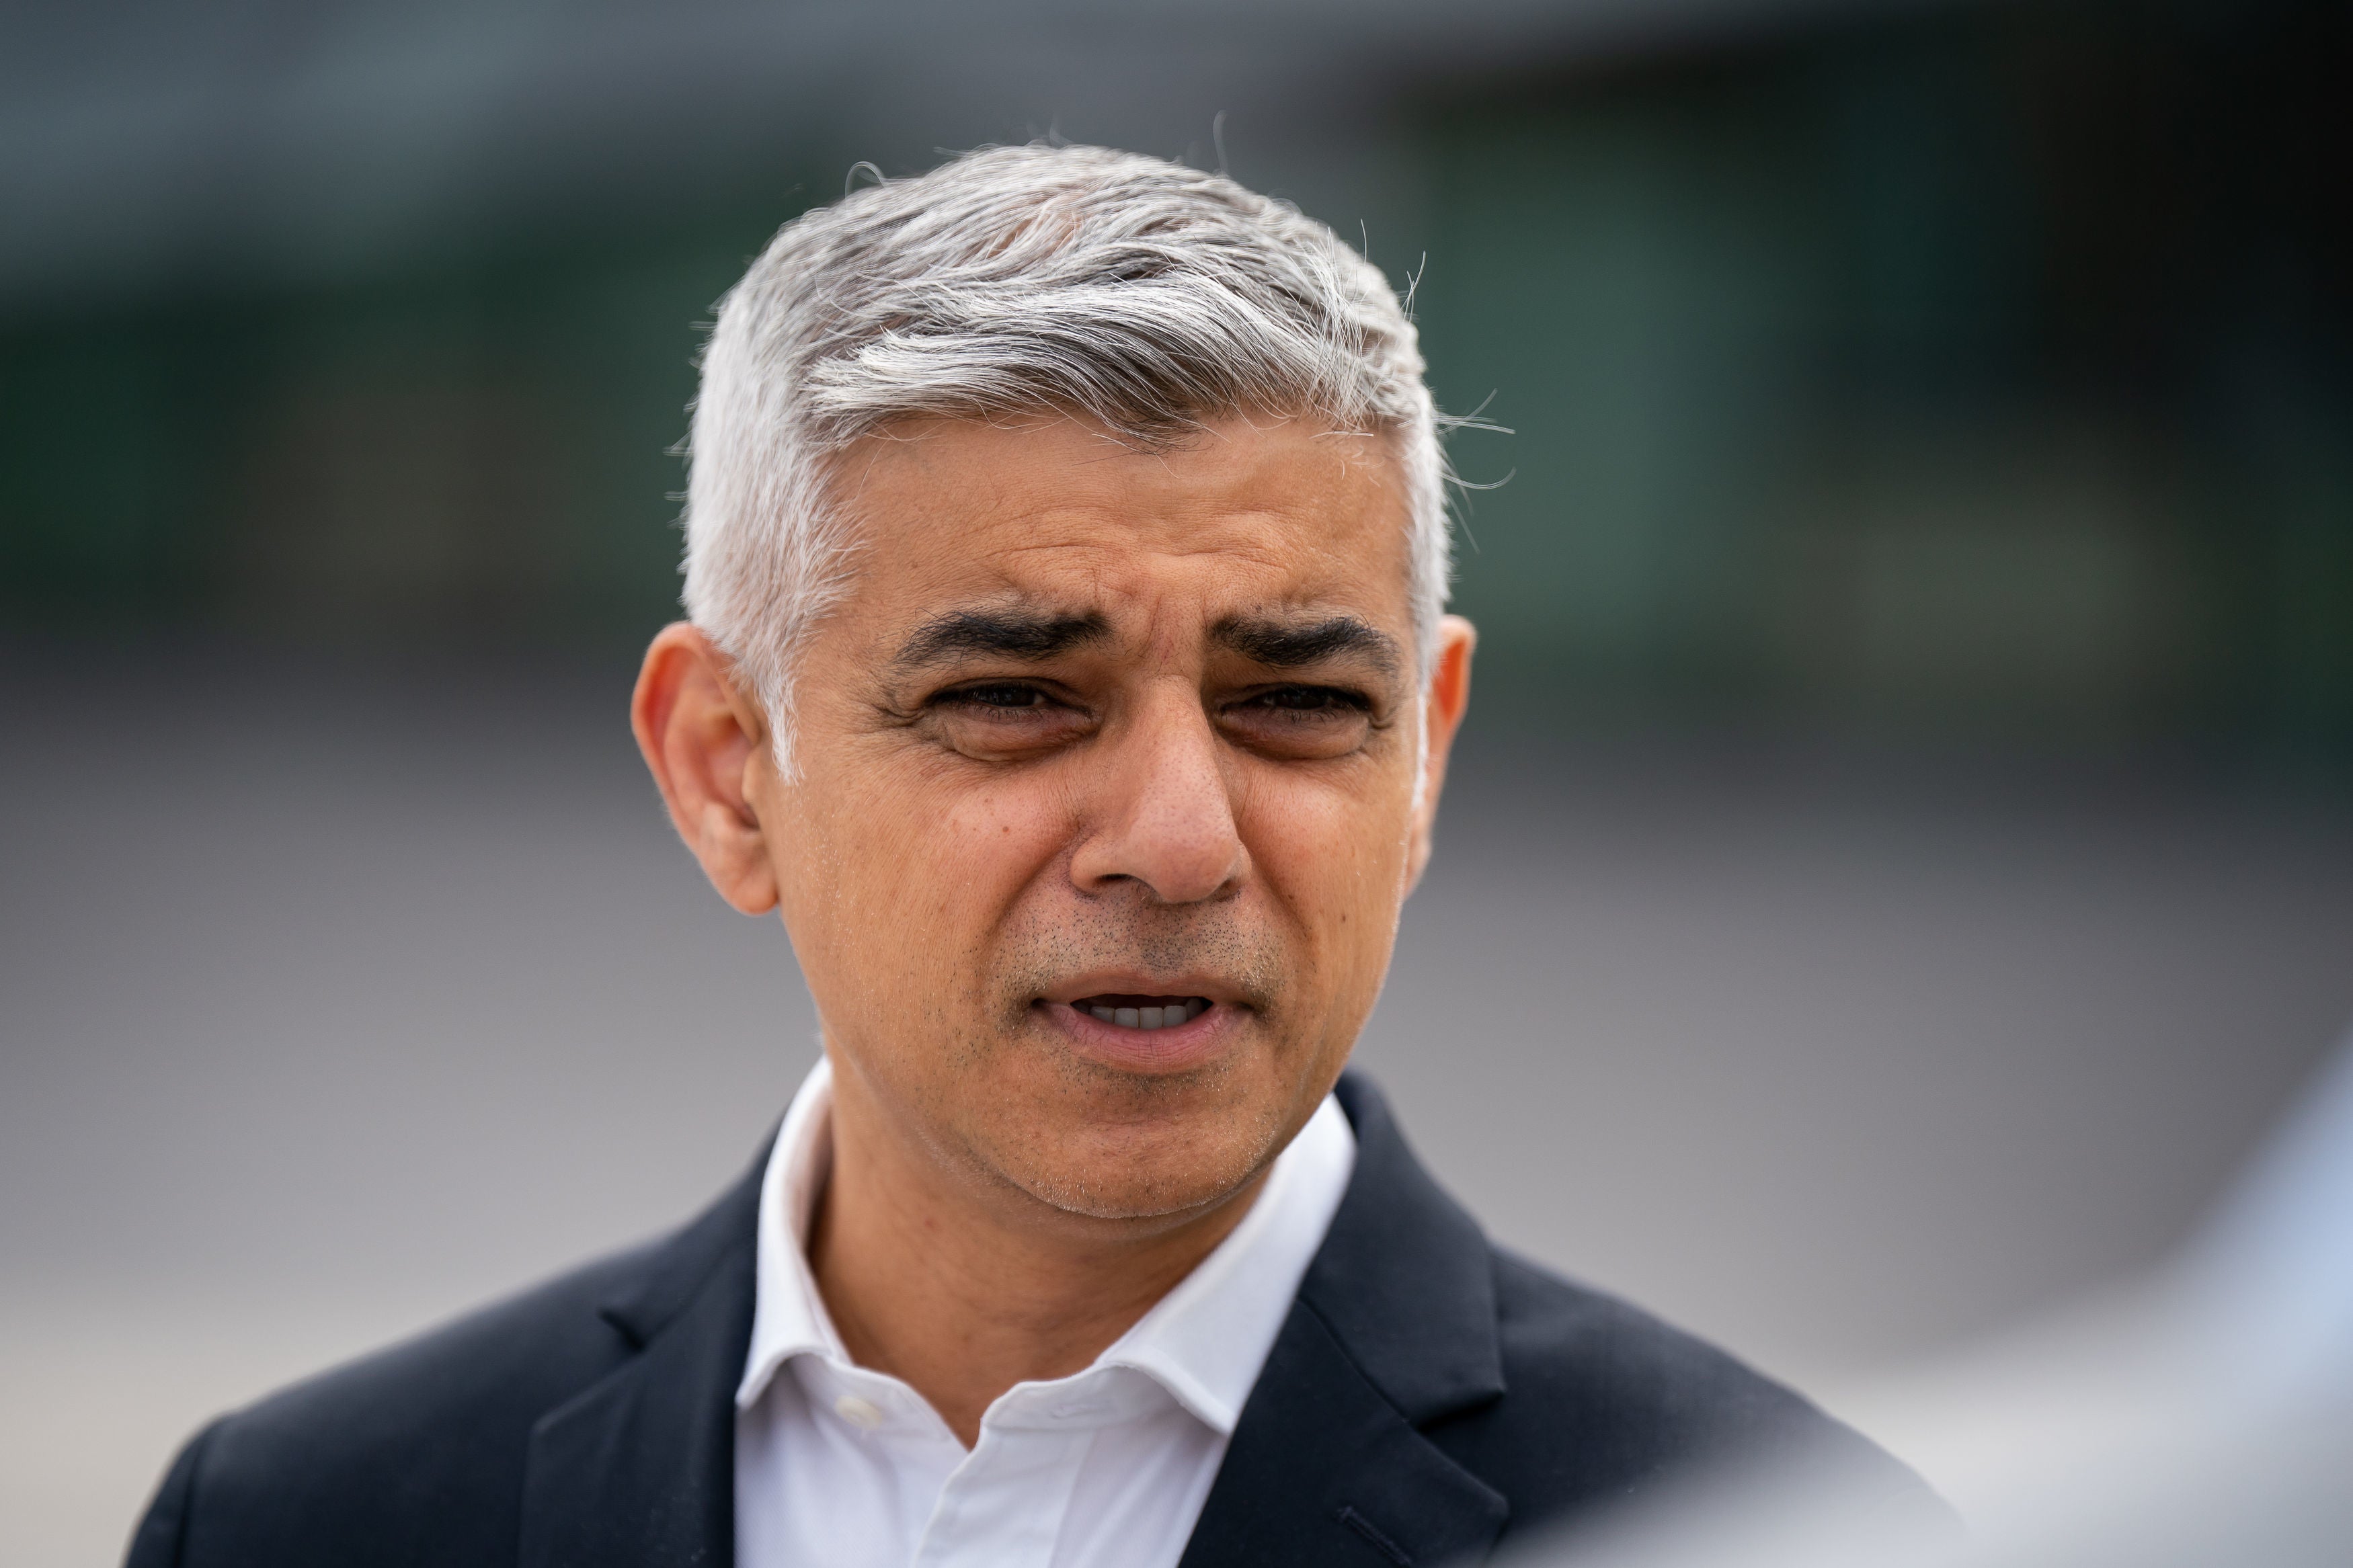 Mayor of London Sadiq Khan speaking to the media outside City Hall in London about the cost-of-living crisis